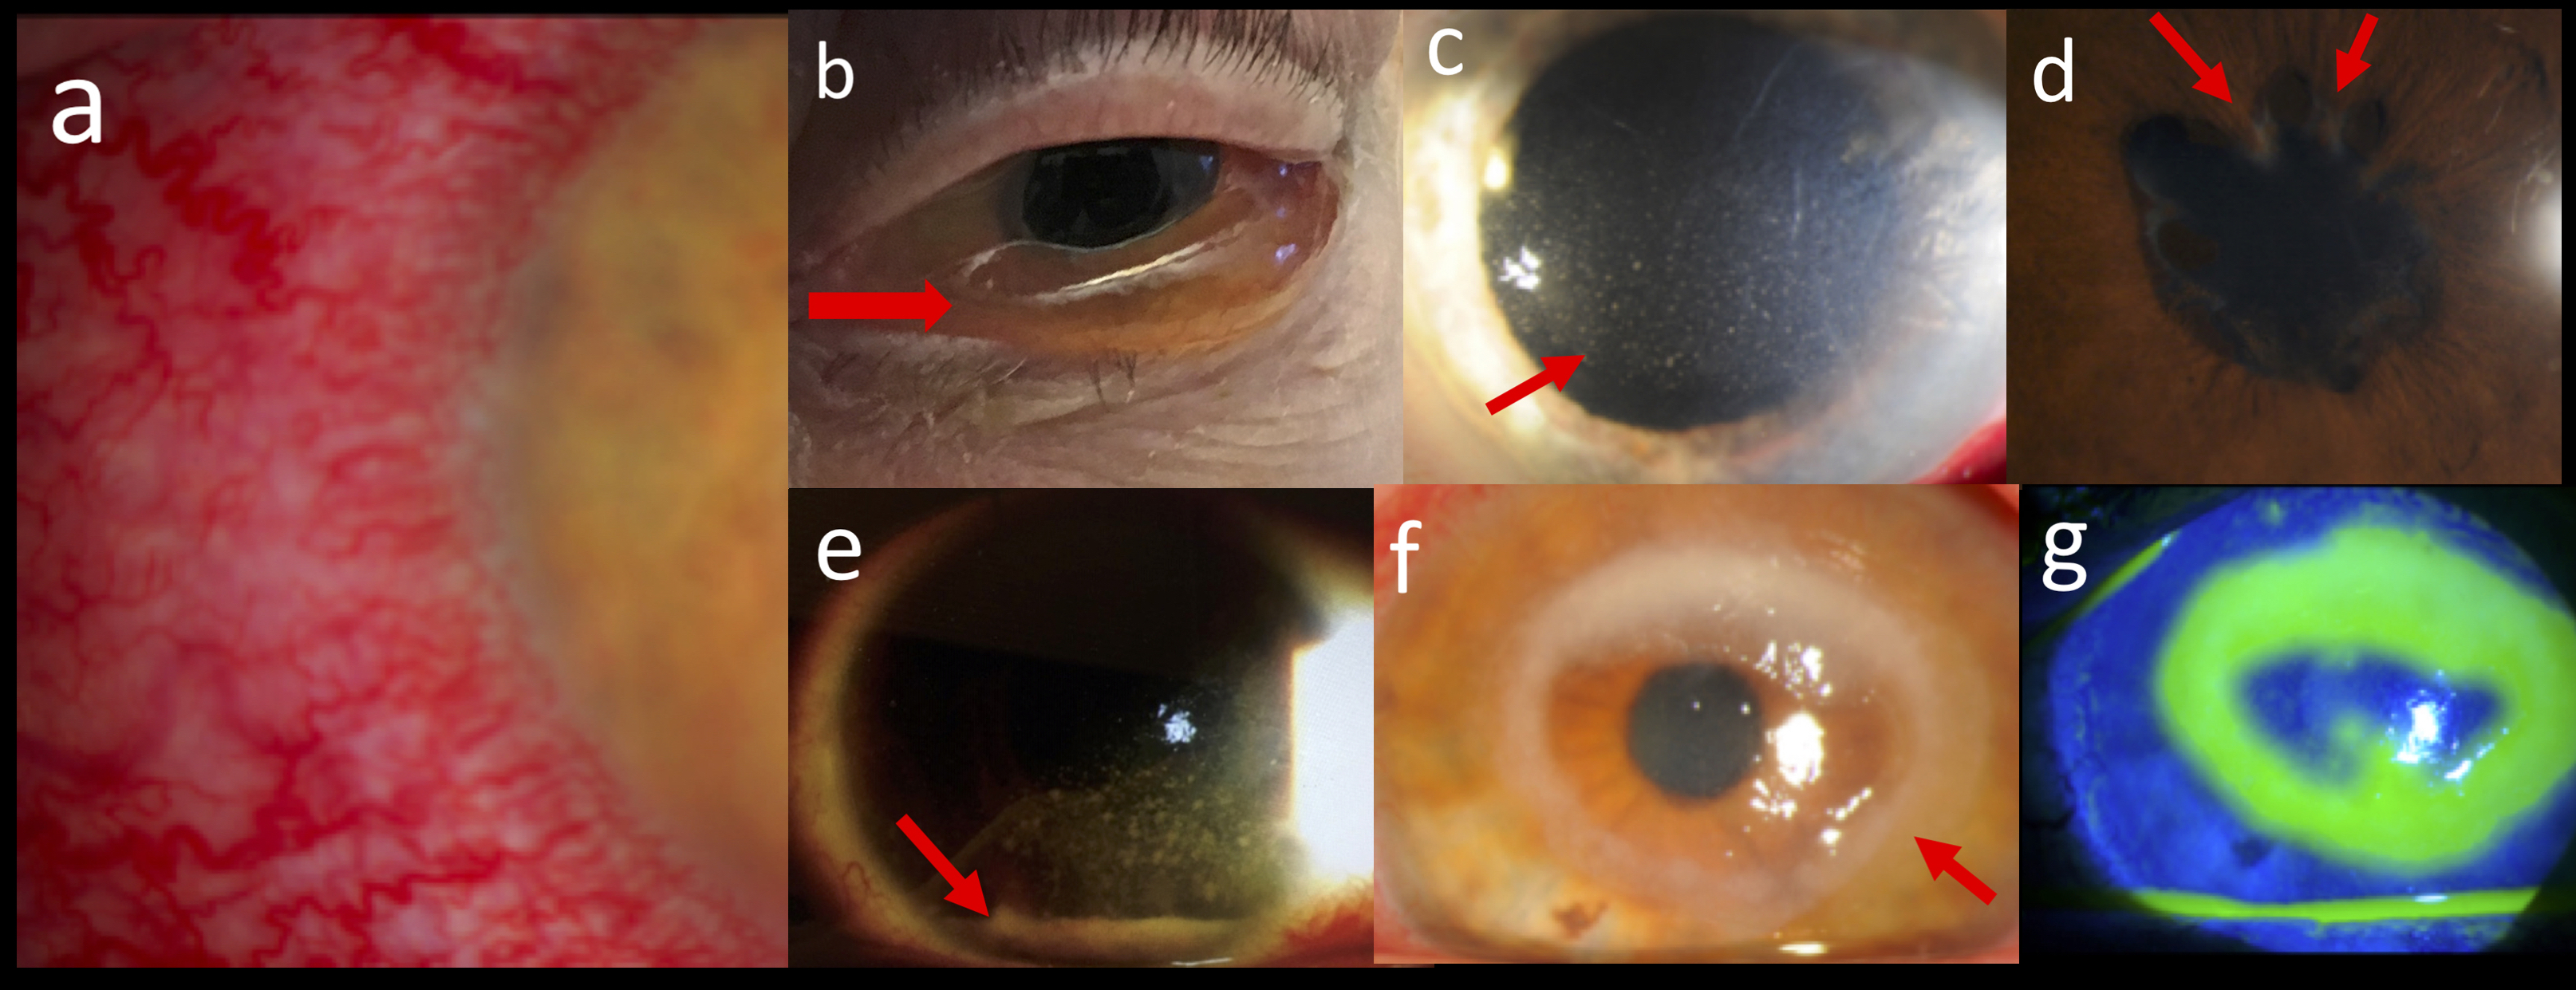 Important findings in differentiating a red, painful eye: (a) Ciliary flush, (b) chemosis (red arrow), (c) keratic precipitates (red arrow), (d) posterior synechiae (red arrows), (e) hypopyn (red arrow), (f) ring infiltrate (red arrow), and (g) fluorescein staining of ulcer found in (f)